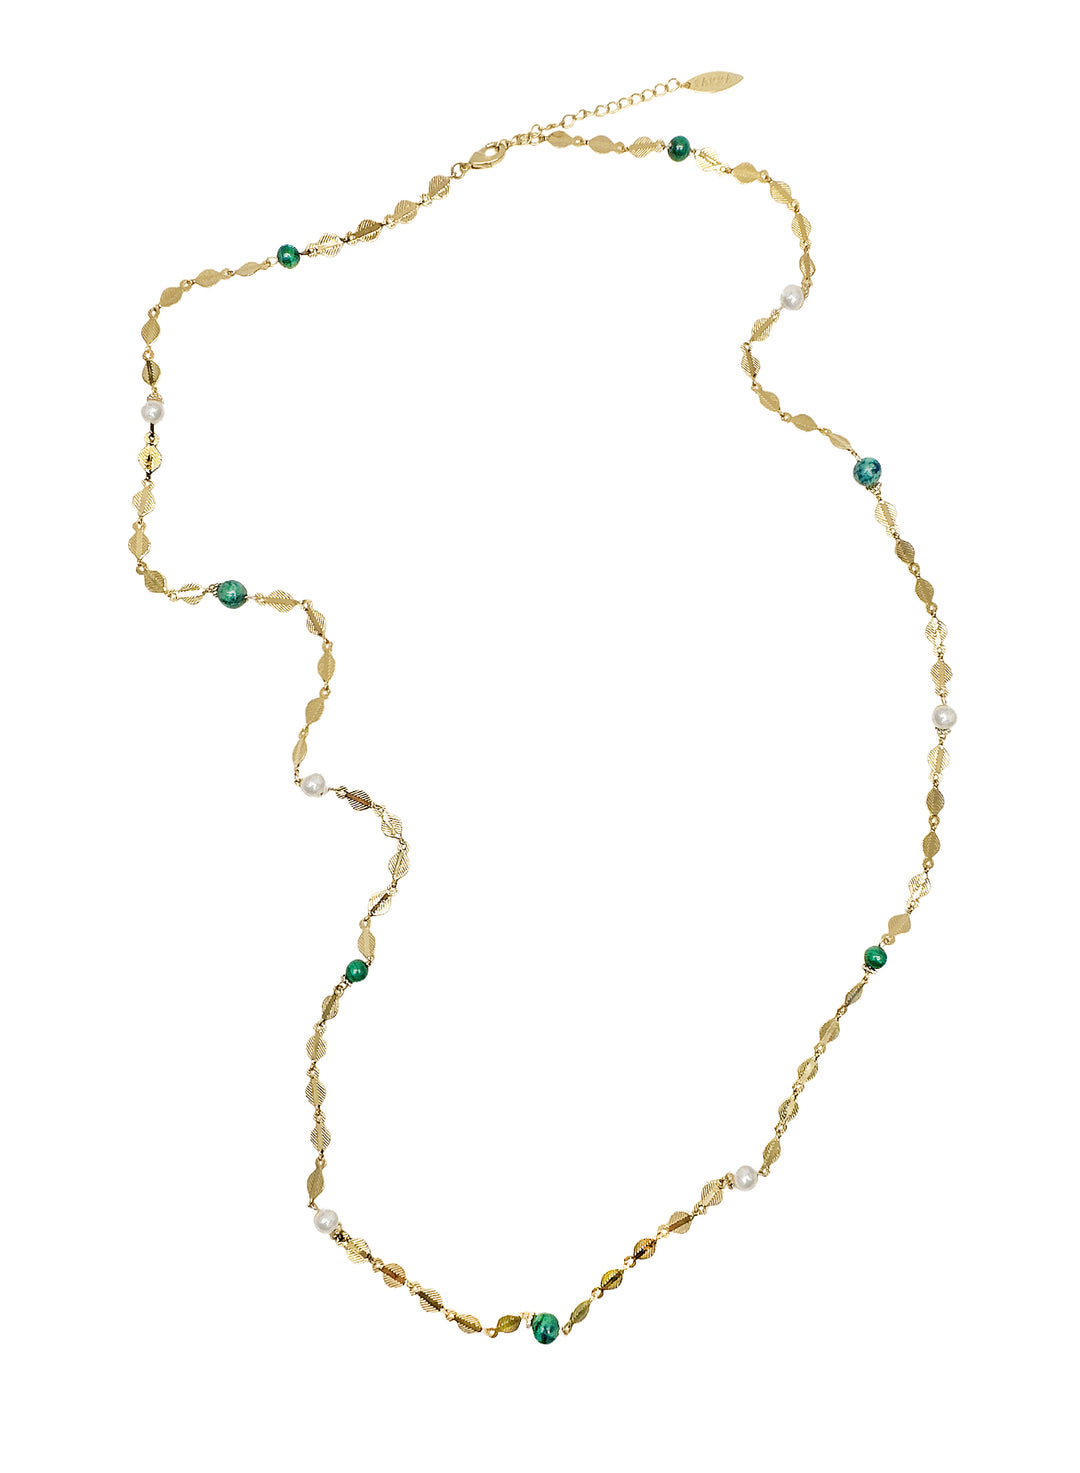 Gold Chain with Green Gemstones and White Pearls Long Necklace LN046 - FARRA